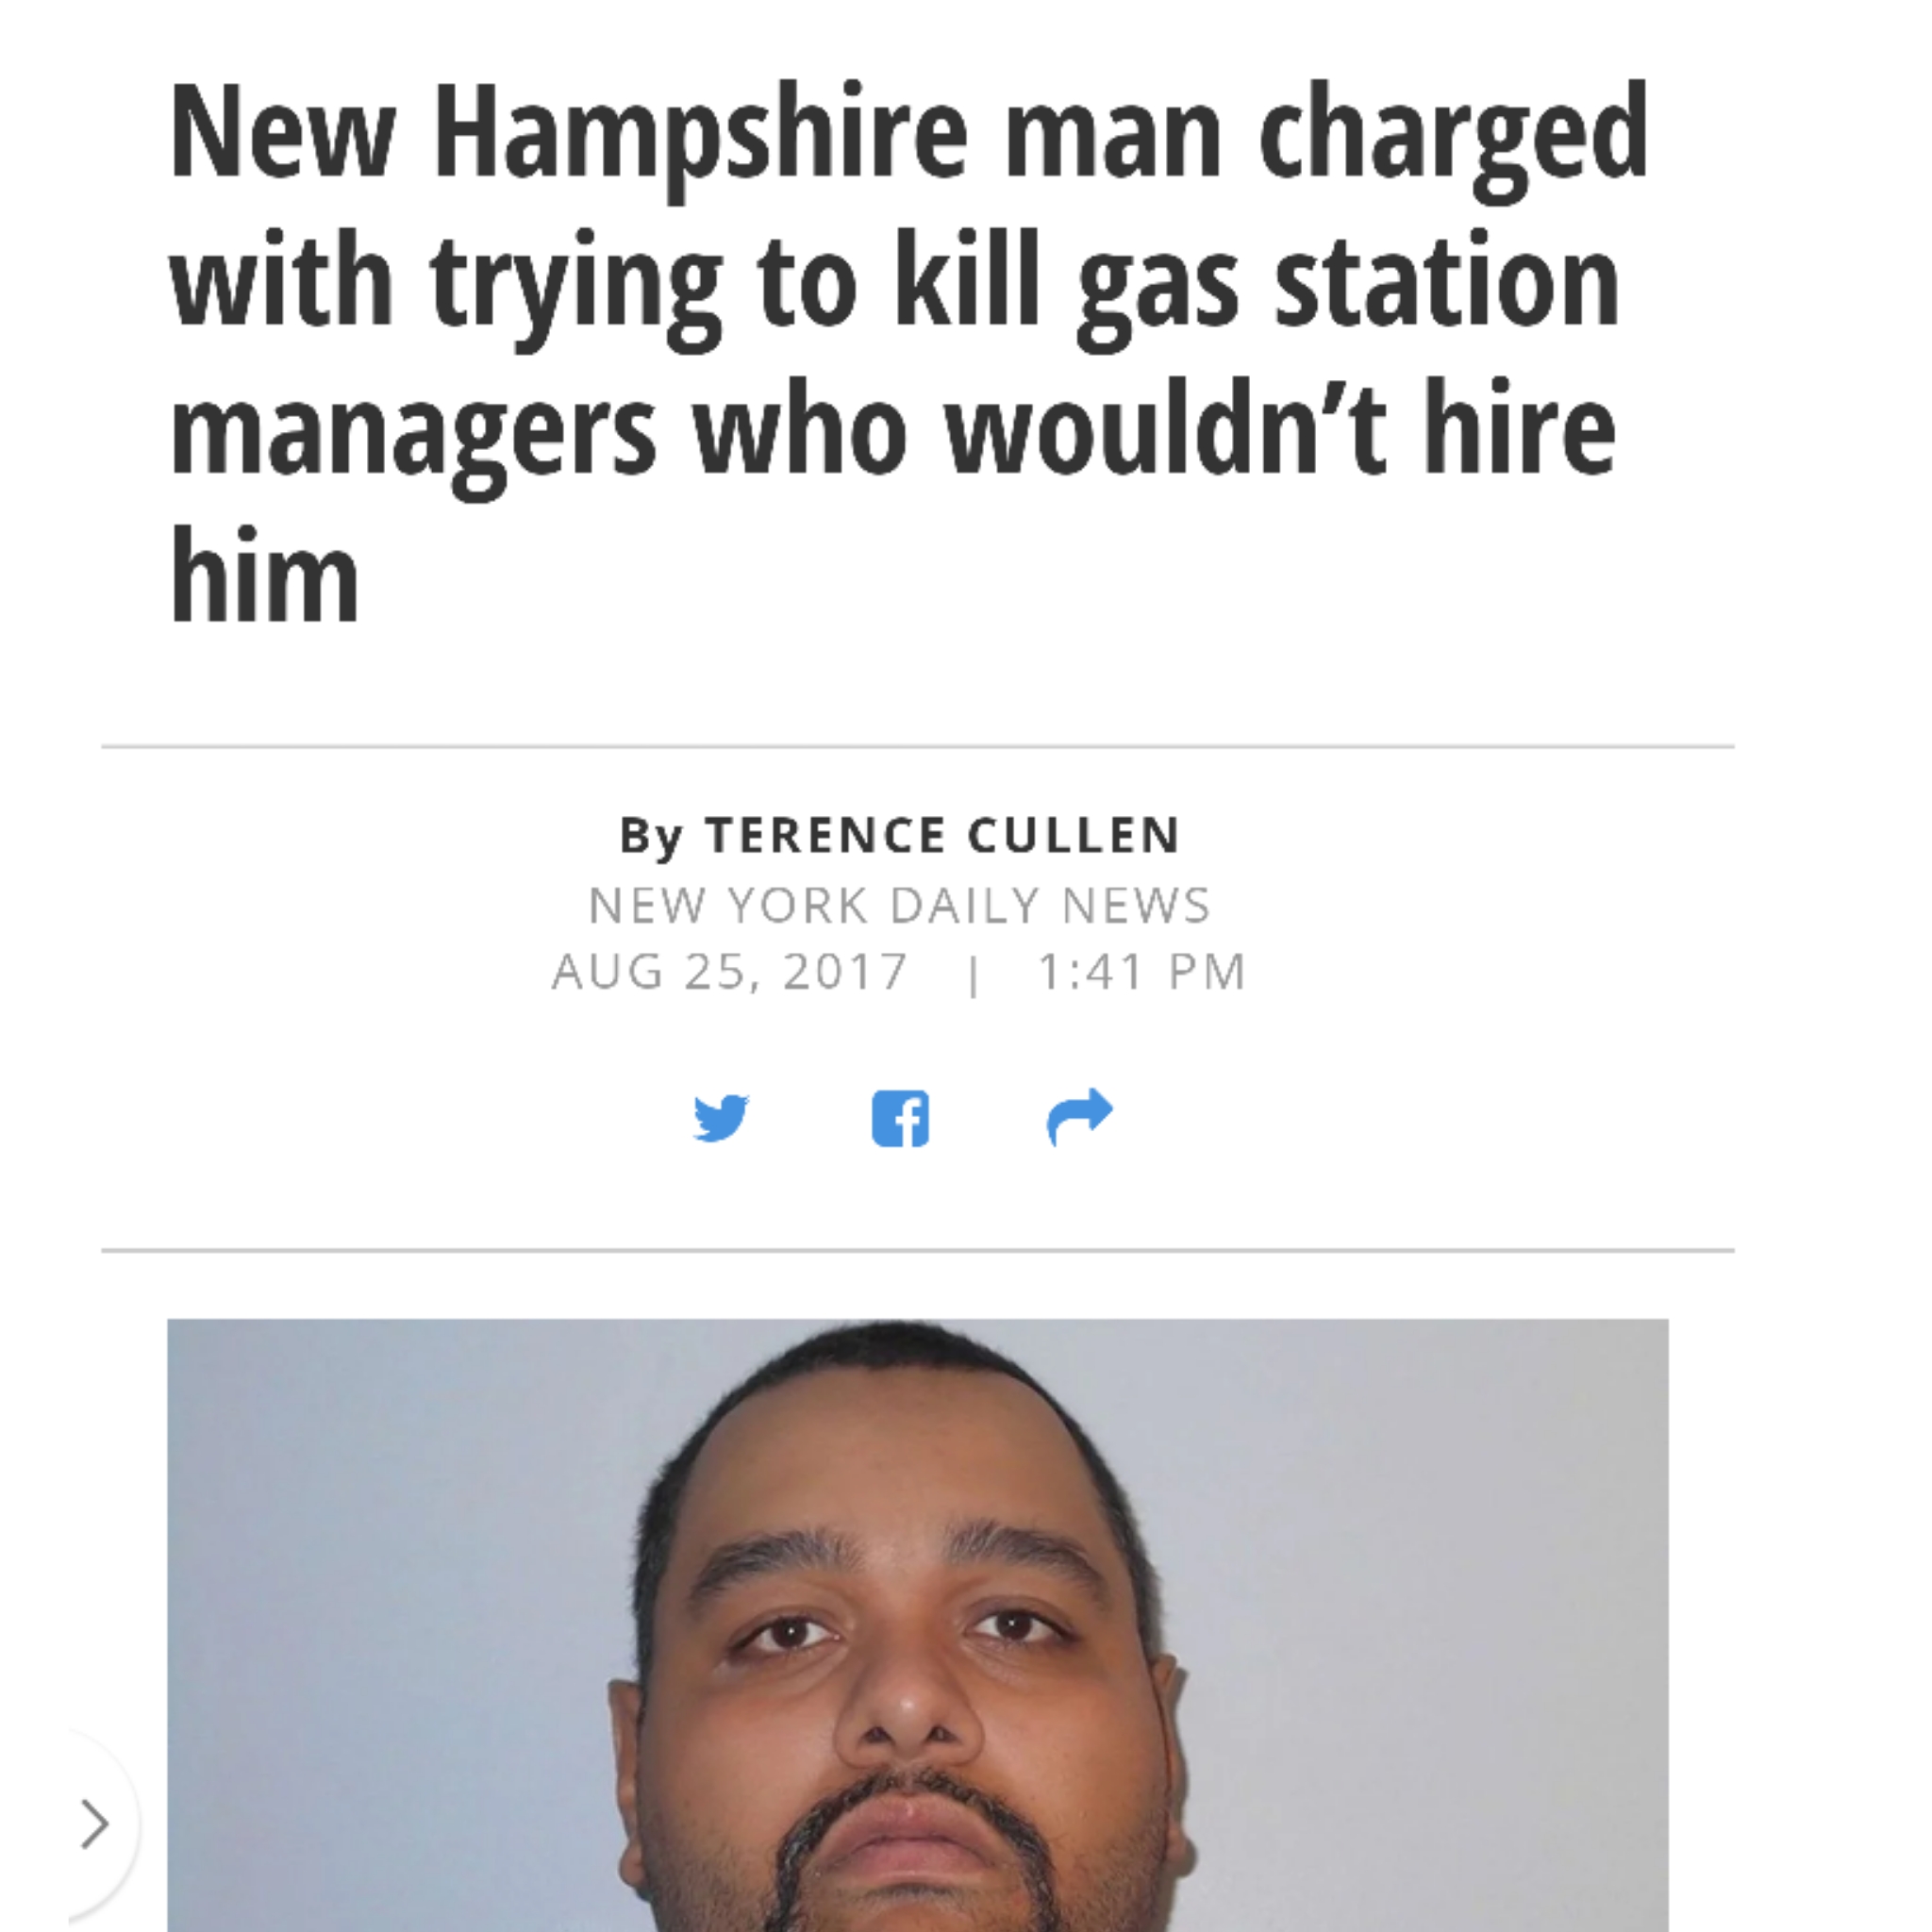 florida man headlines - New Hampshire man charged with trying to kill gas station managers who wouldn't hire him By Terence Cullen New York Daily News